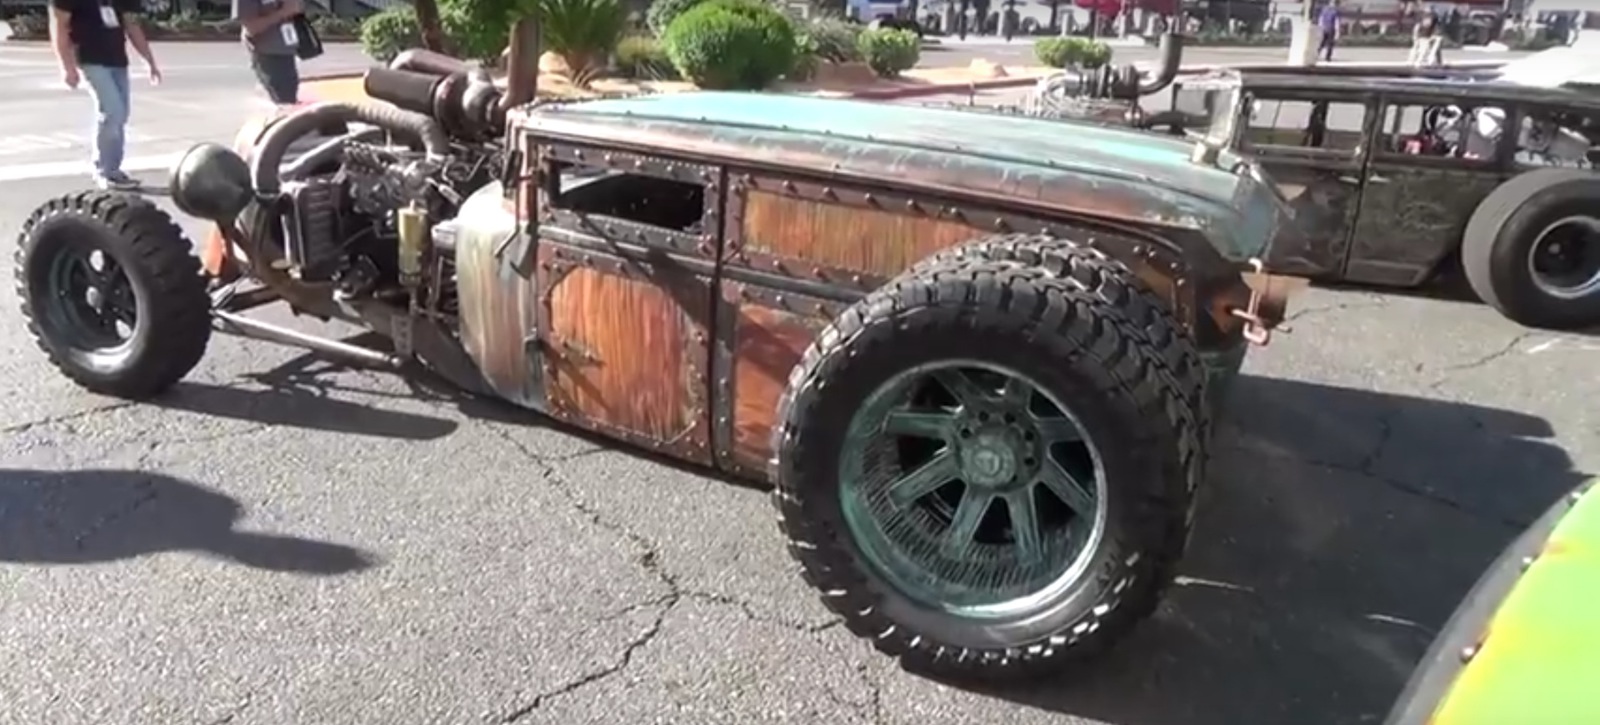 Are Rat Rods The Dadaists Of The New Century?